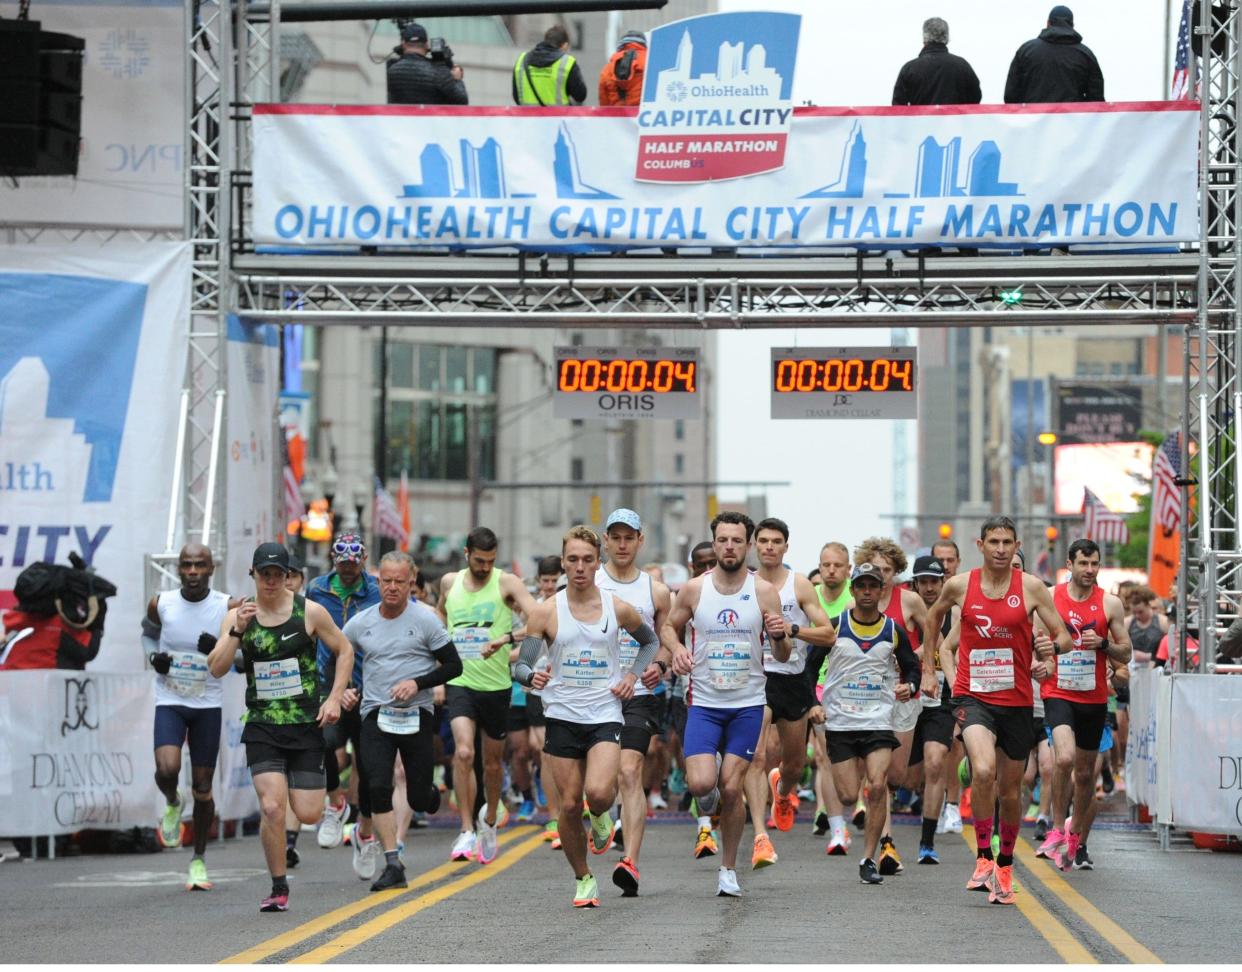 The OhioHealth Capital City Half Marathon, which takes place downtown on Saturday, will include half and quarter marathons, as well as a 5K walk/run.